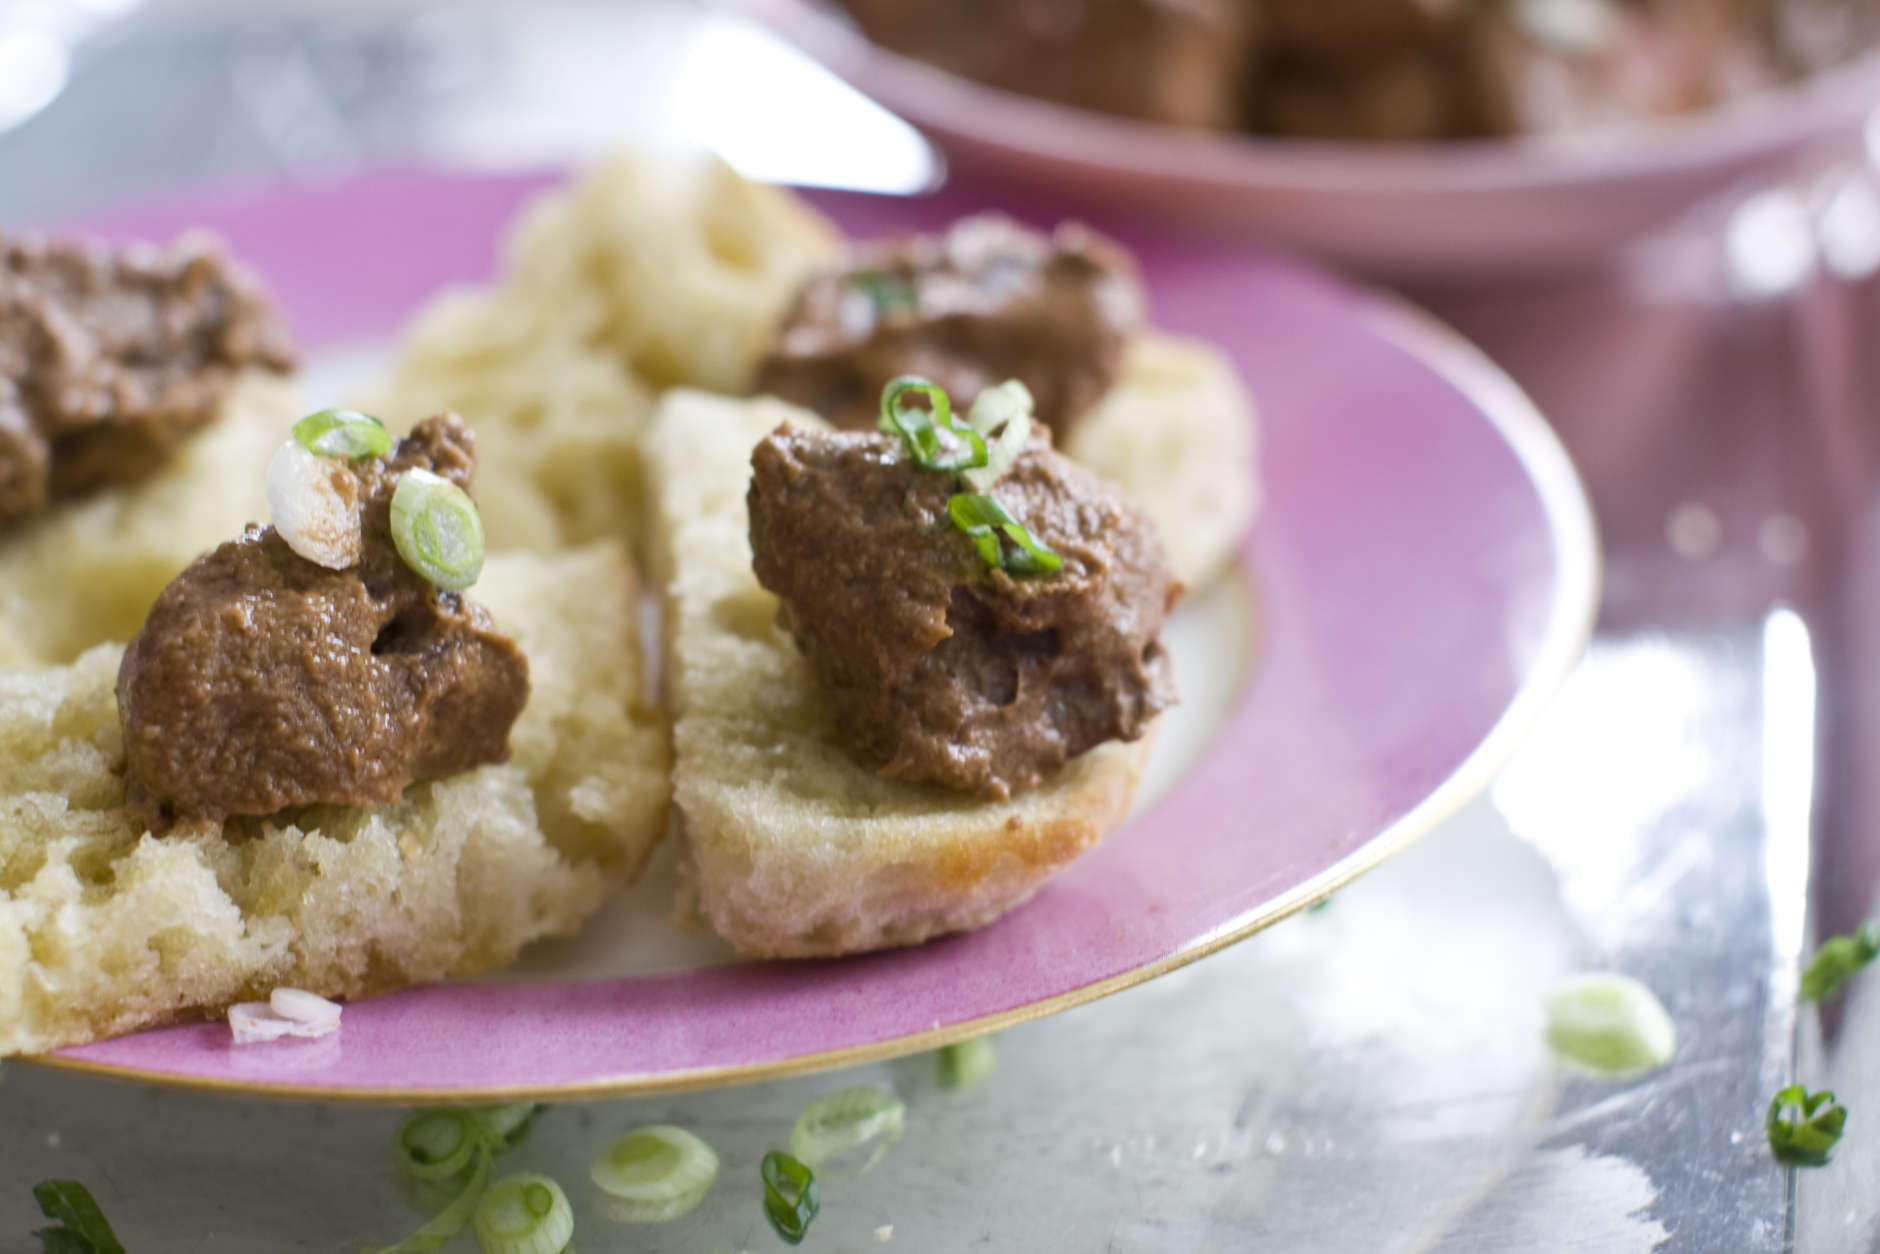 This Jan. 27, 2014 photo shows Beef Mole with a Buttery Baguette in Concord, N.H. (AP Photo/Matthew Mead)